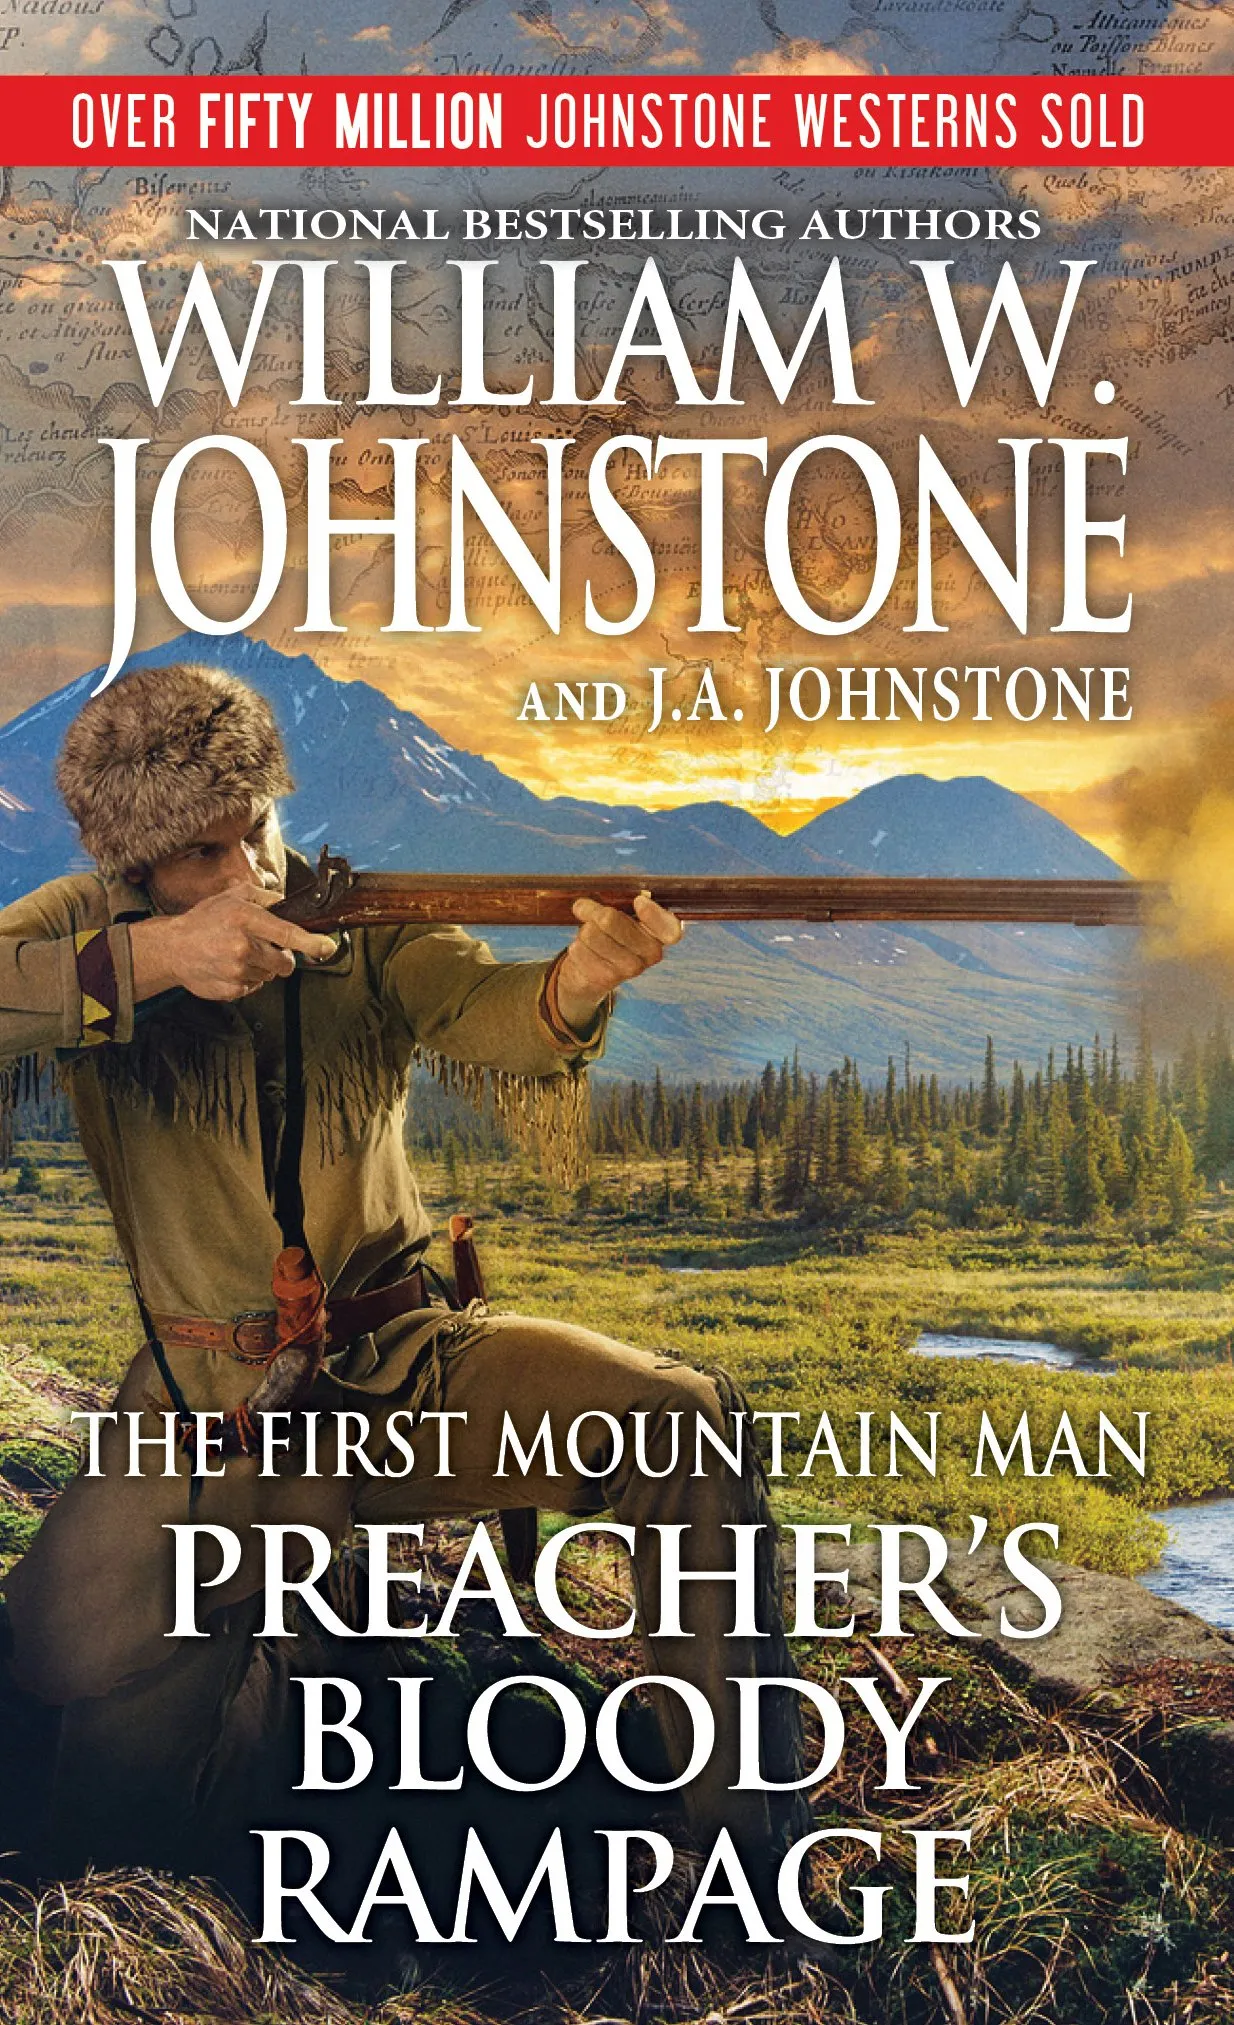 Preacher's Bloody Rampage (The First Mountain Man #30)